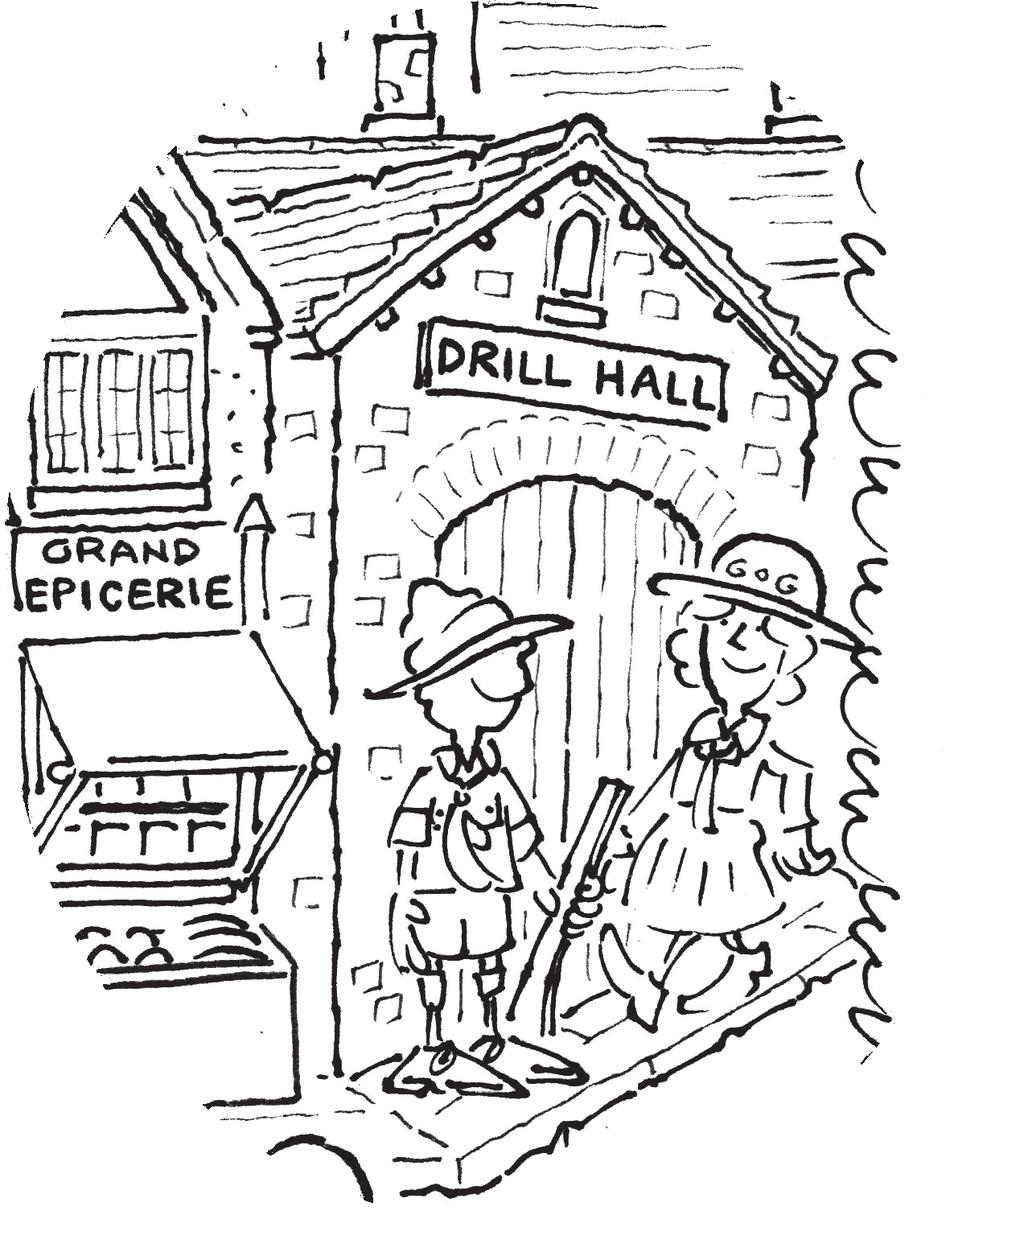 By Land: Site Type - drill hall. D H _ Where soldiers practiced marching and military skills indoors (drill).